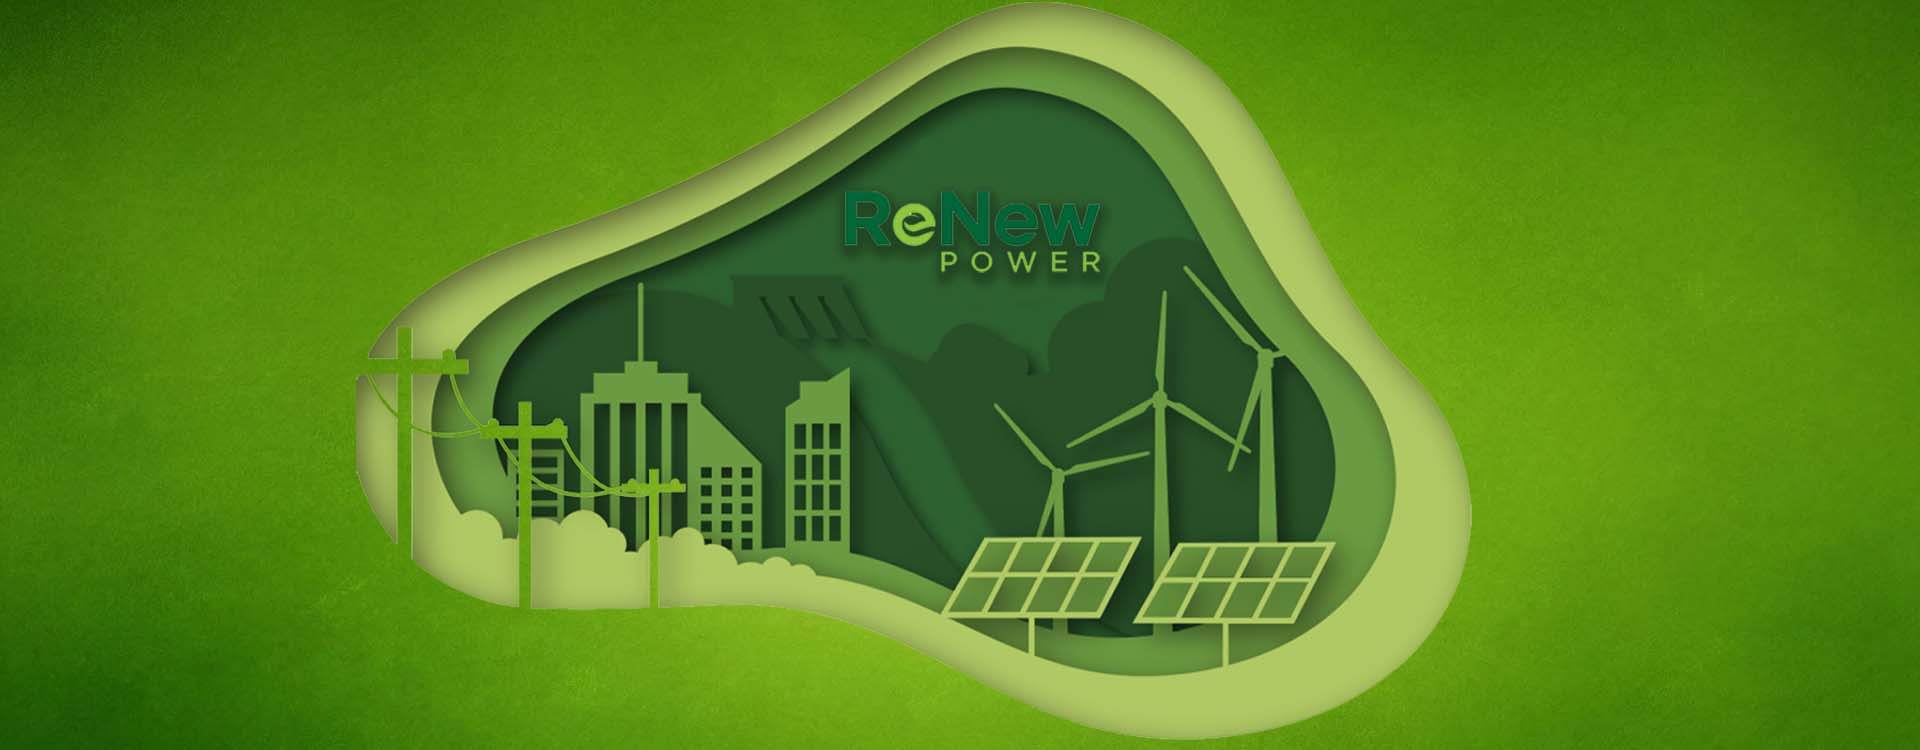 ReNew Power: Re-Structuring the Face of Renewable Energy in India